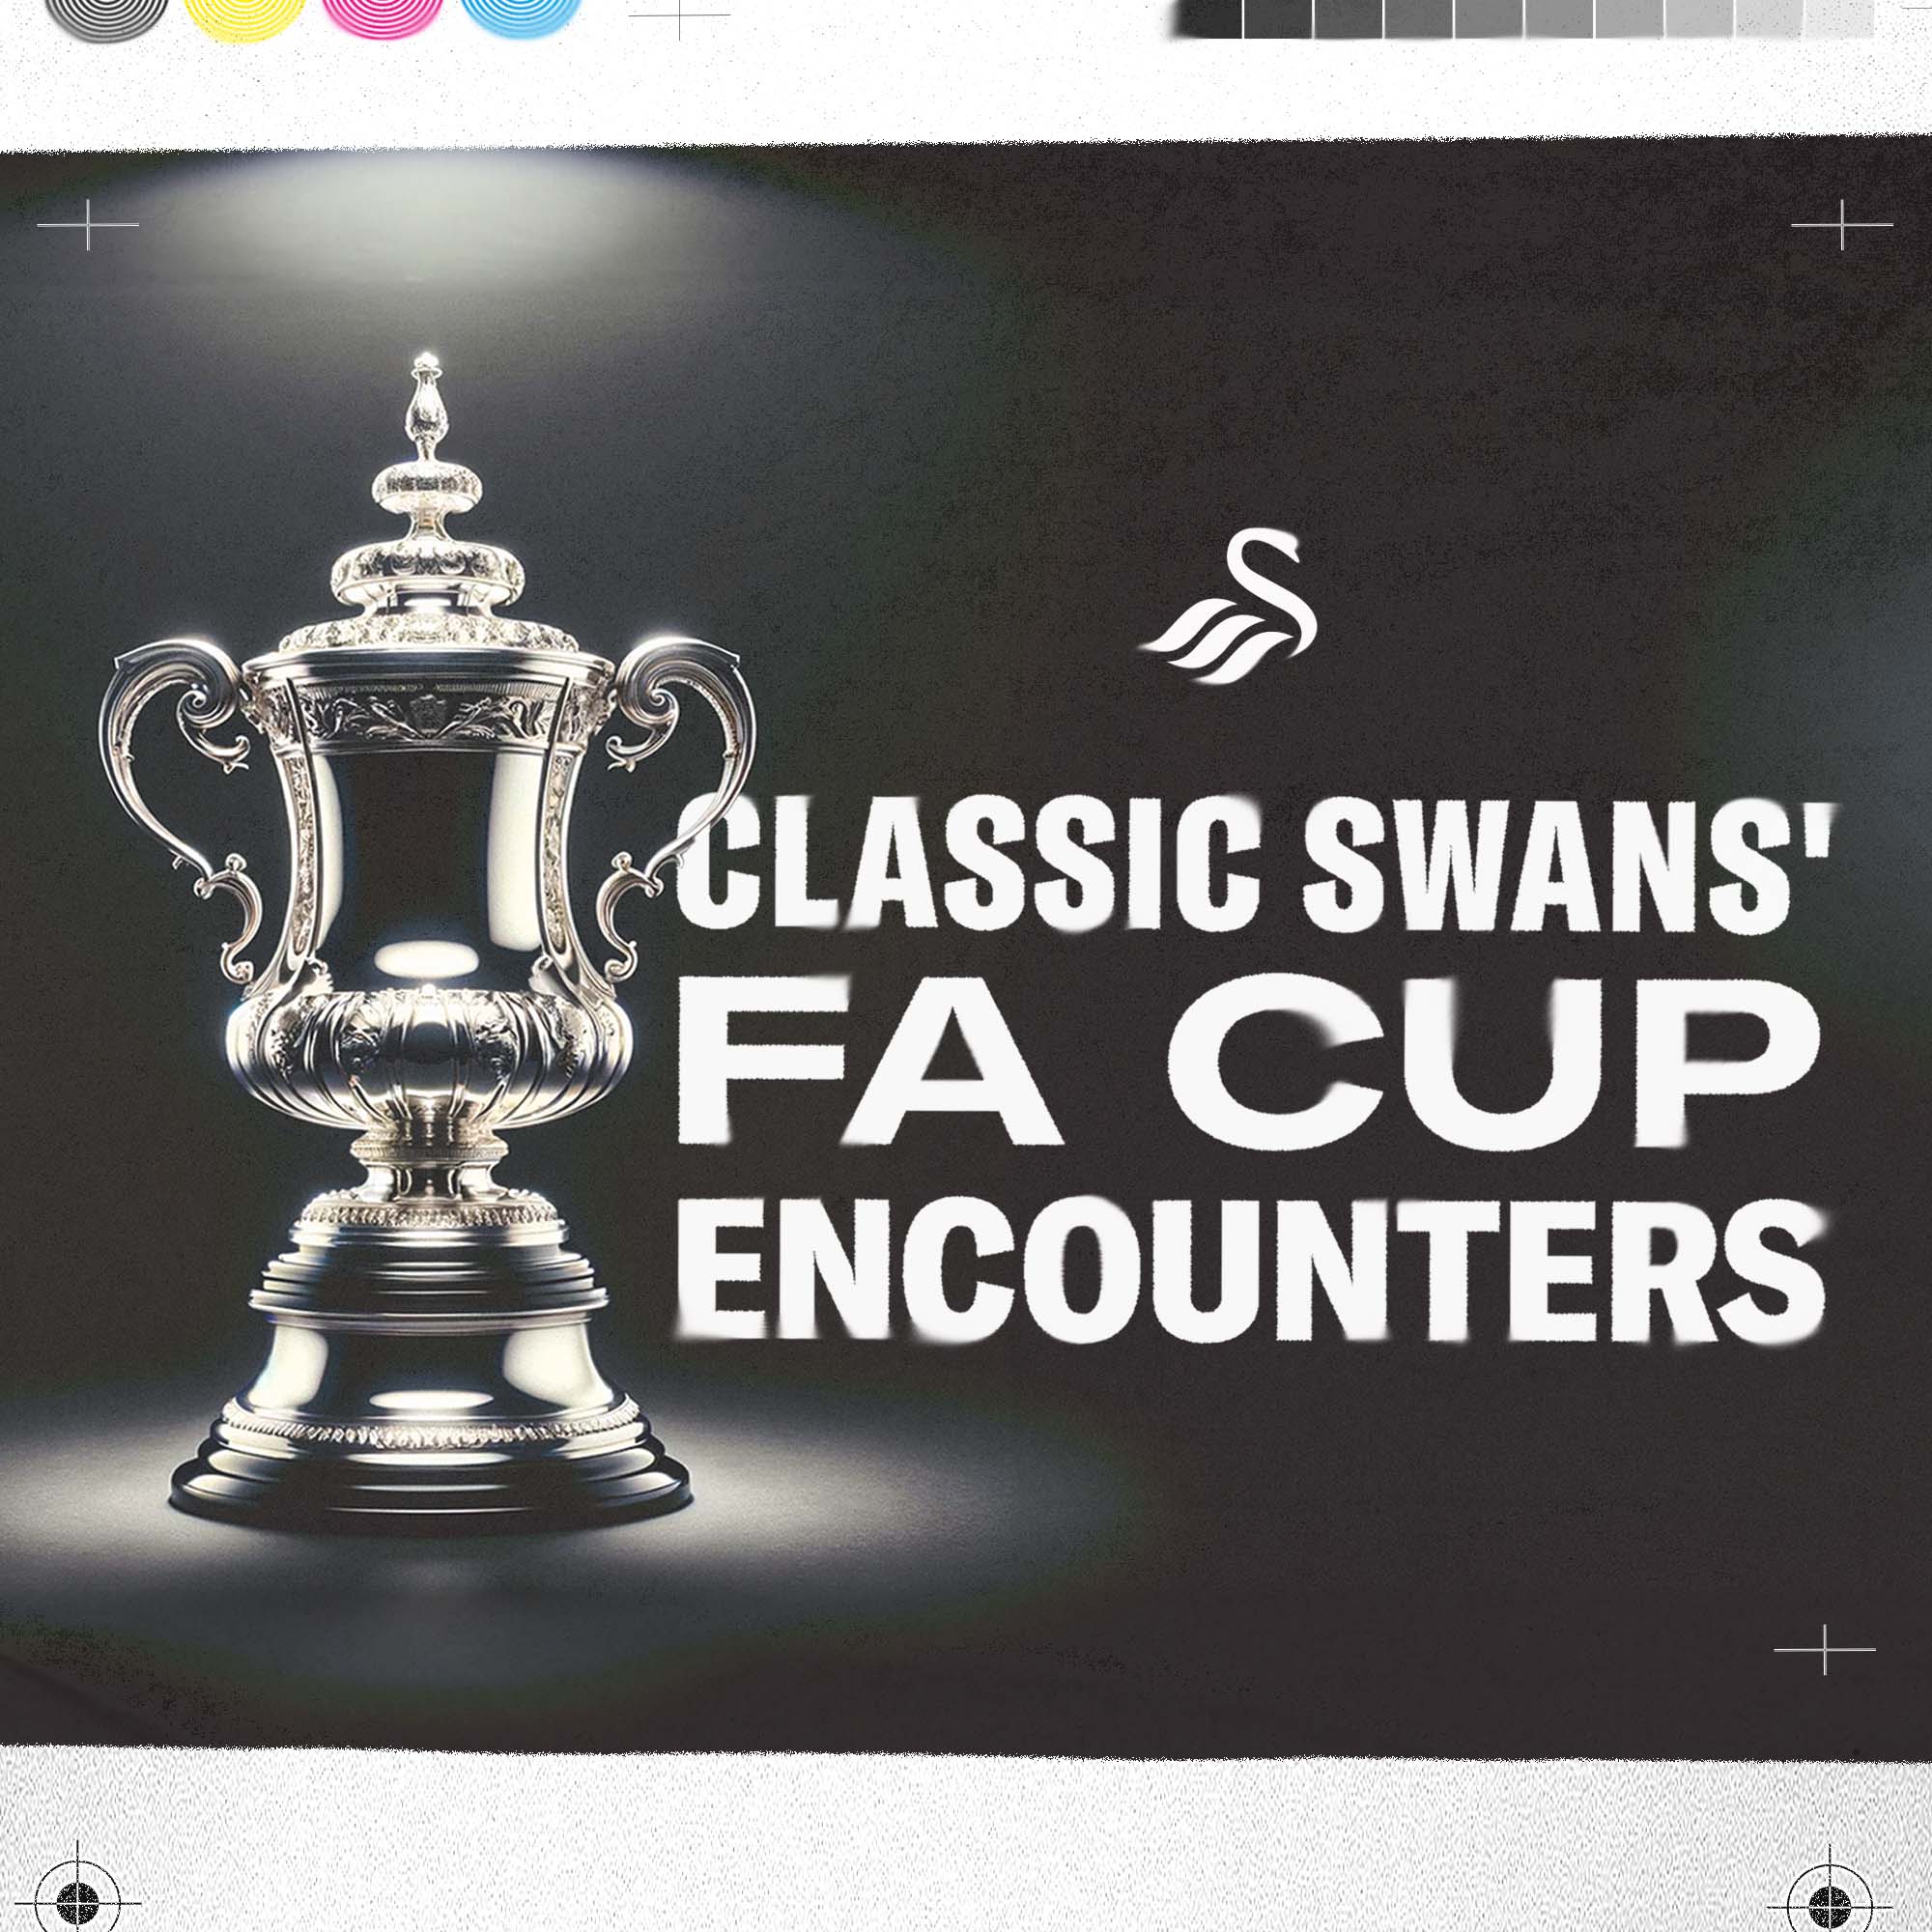 Classic Swans' FA Cup Encounters